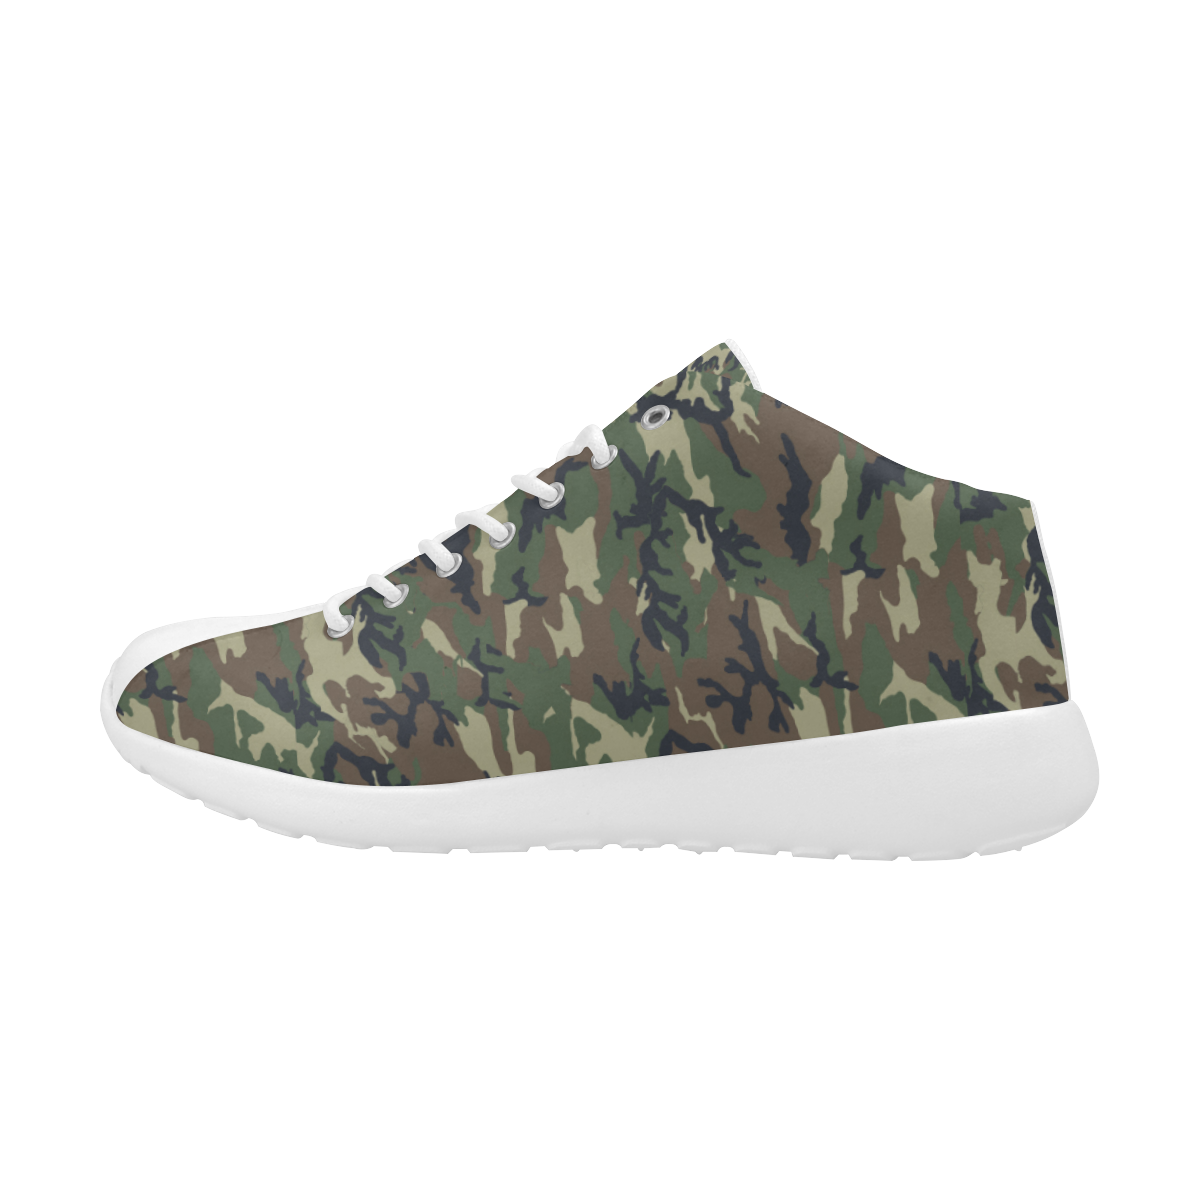 Woodland Forest Green Camouflage Women's Basketball Training Shoes/Large Size (Model 47502)